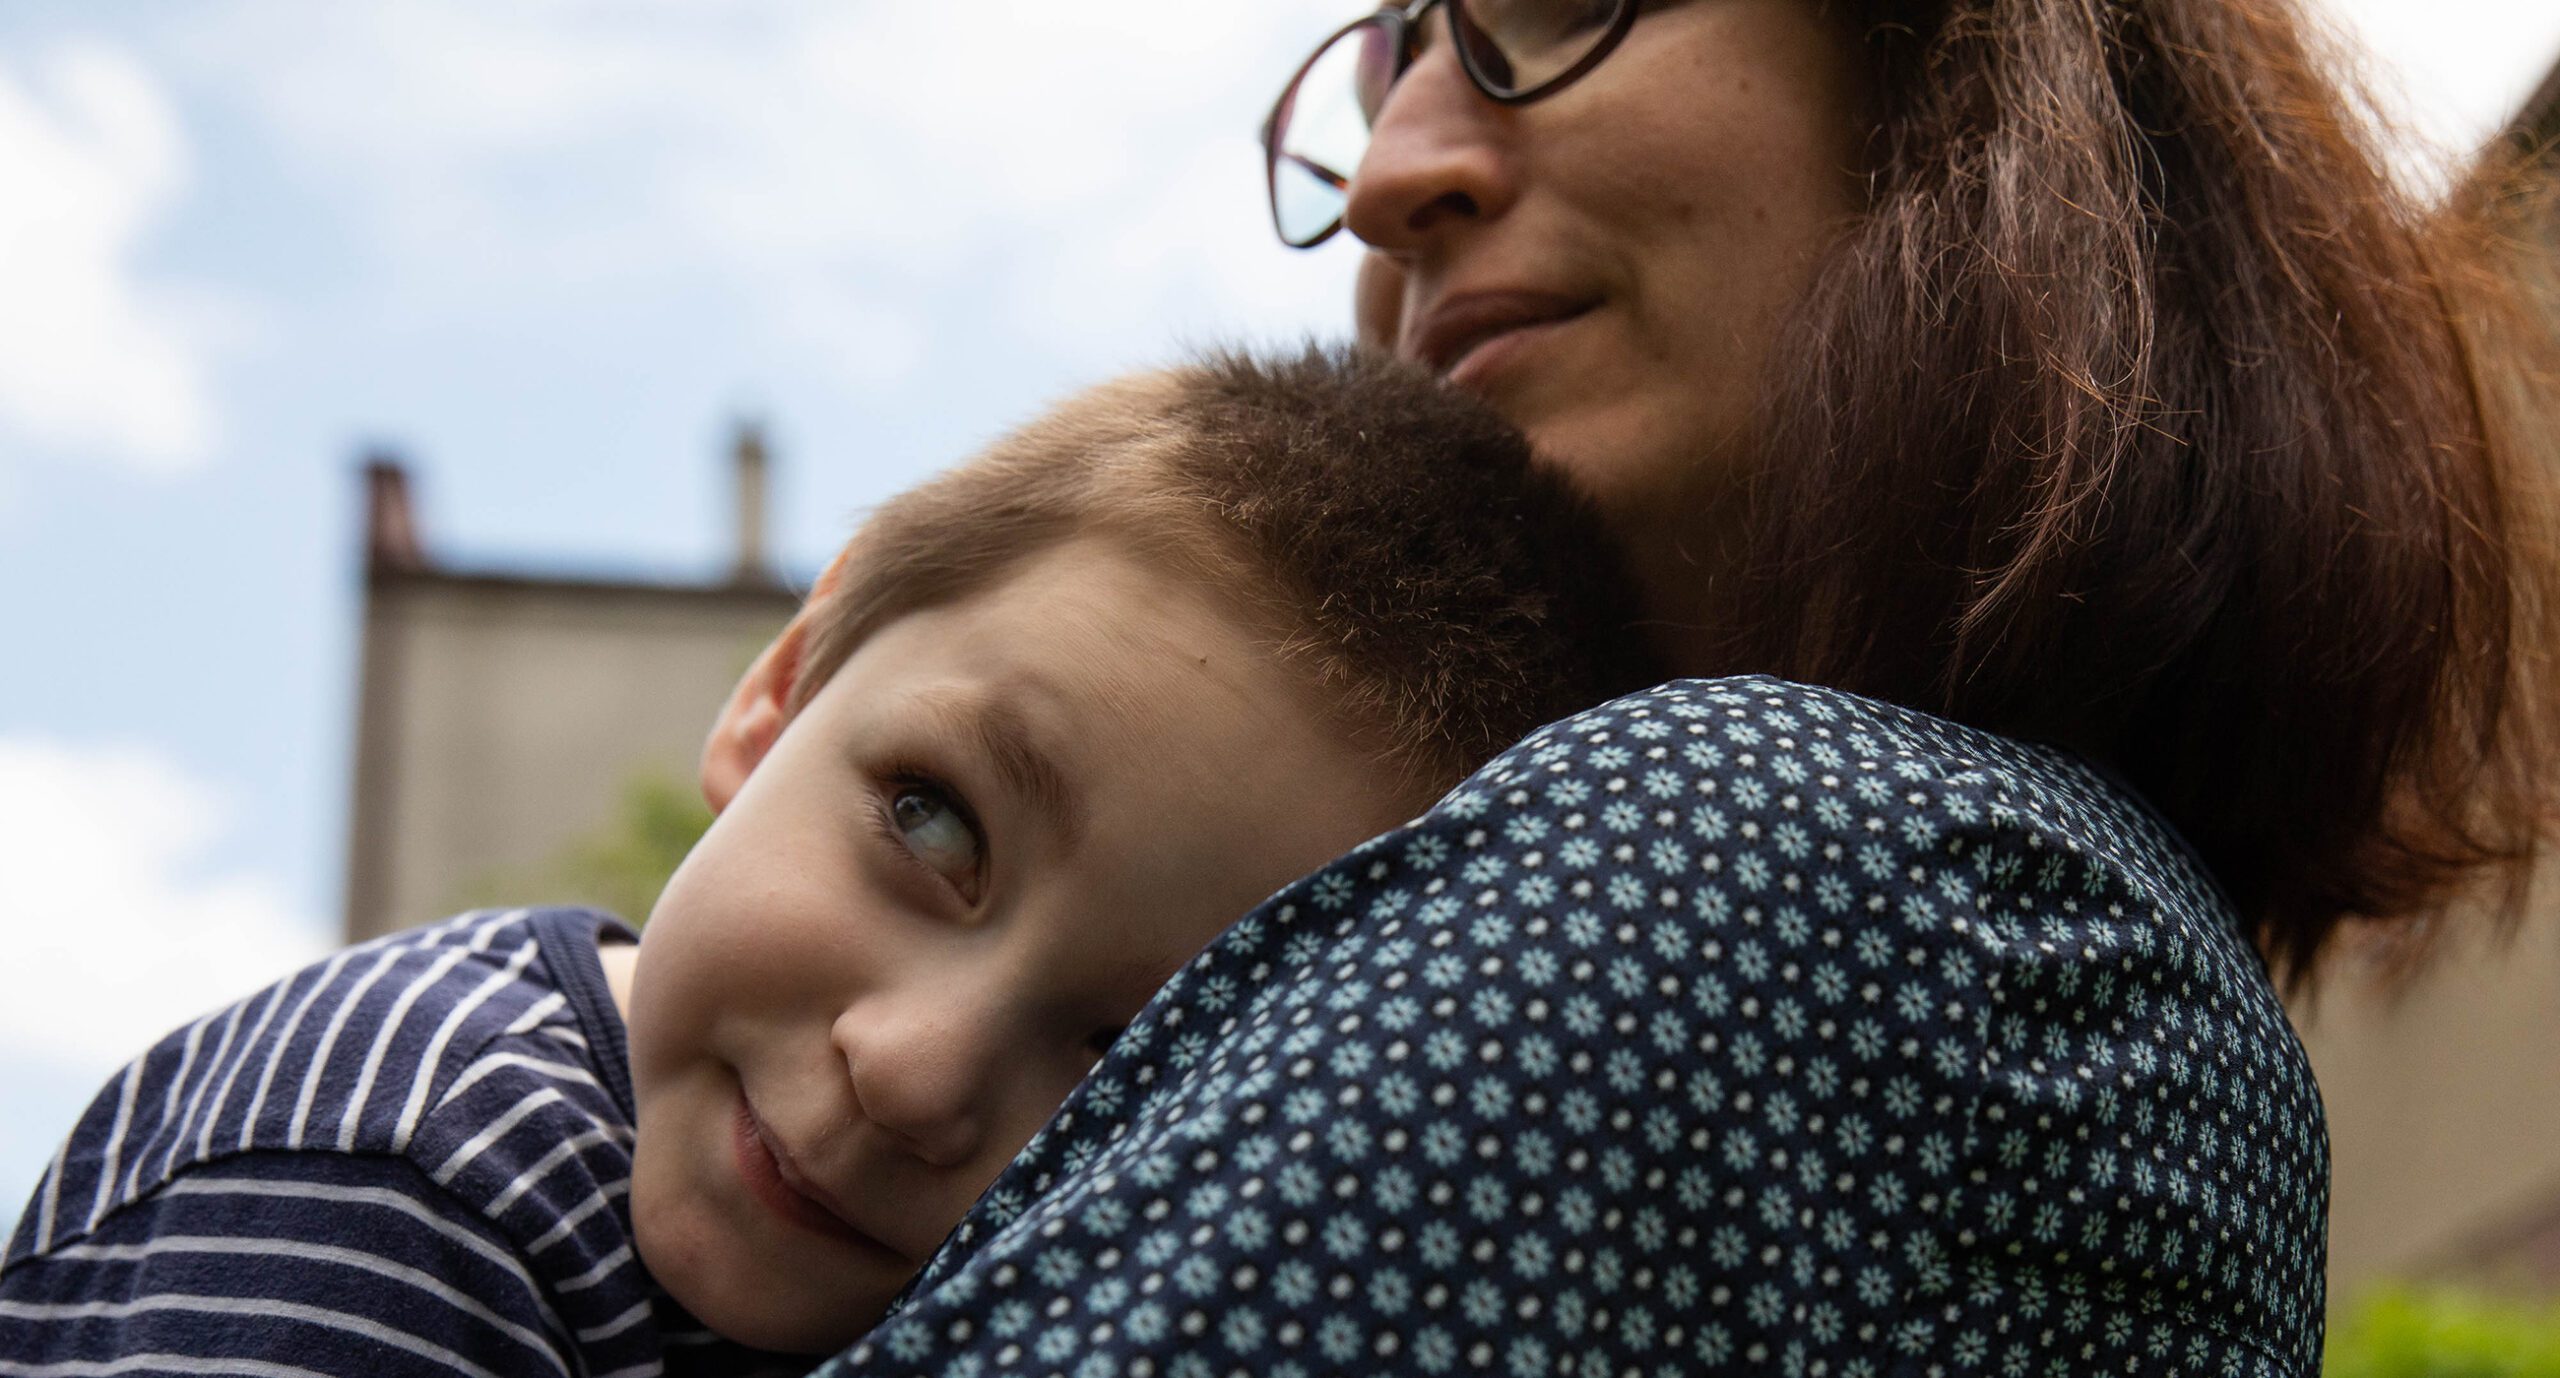 Ilia Ryzka, who has autism and cerebral palsy, hugs his mother, Zoia, in the yard of the L'Arche house where his family stays with other refugees from Ukraine on May 30, 2022 in Wieliczka, Poland. (Betsy Joles for HIAS)